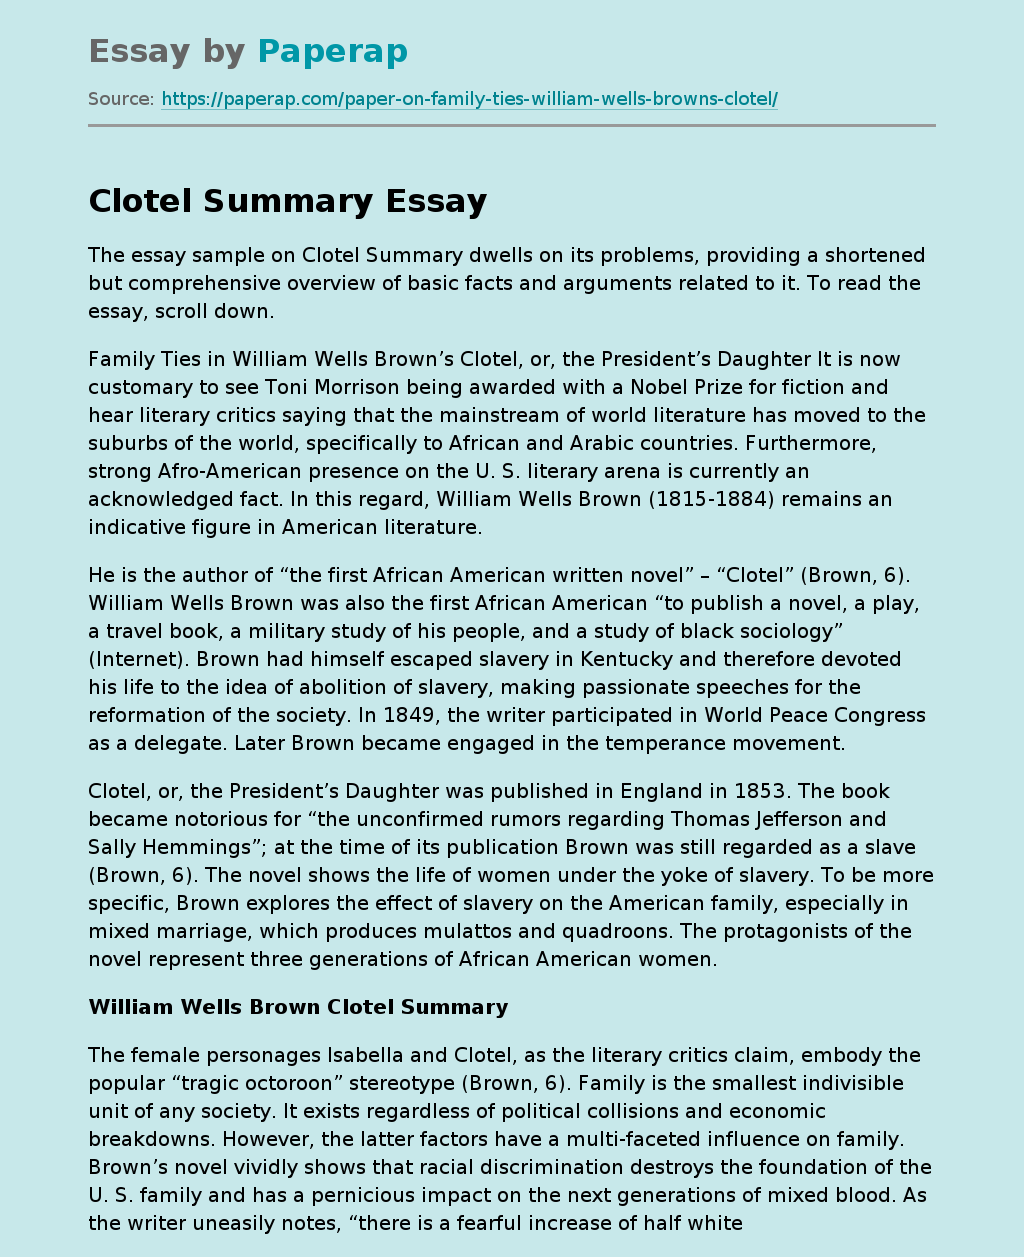 Clotel Summary: Key Issues and Arguments